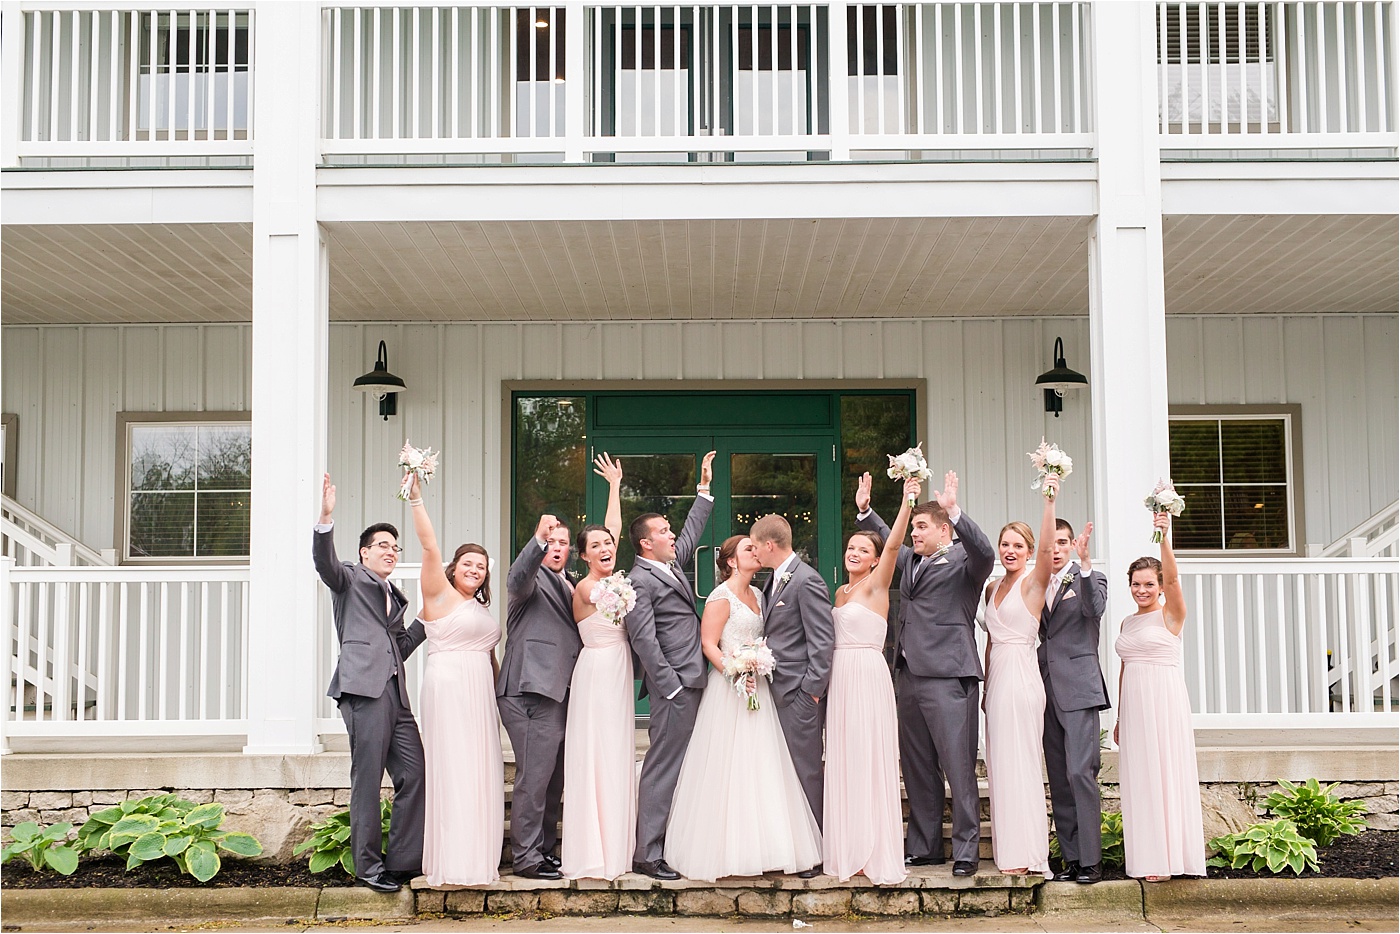 A Blush Outdoor wedding at Irongate Equestrian | KariMe Photography_0105